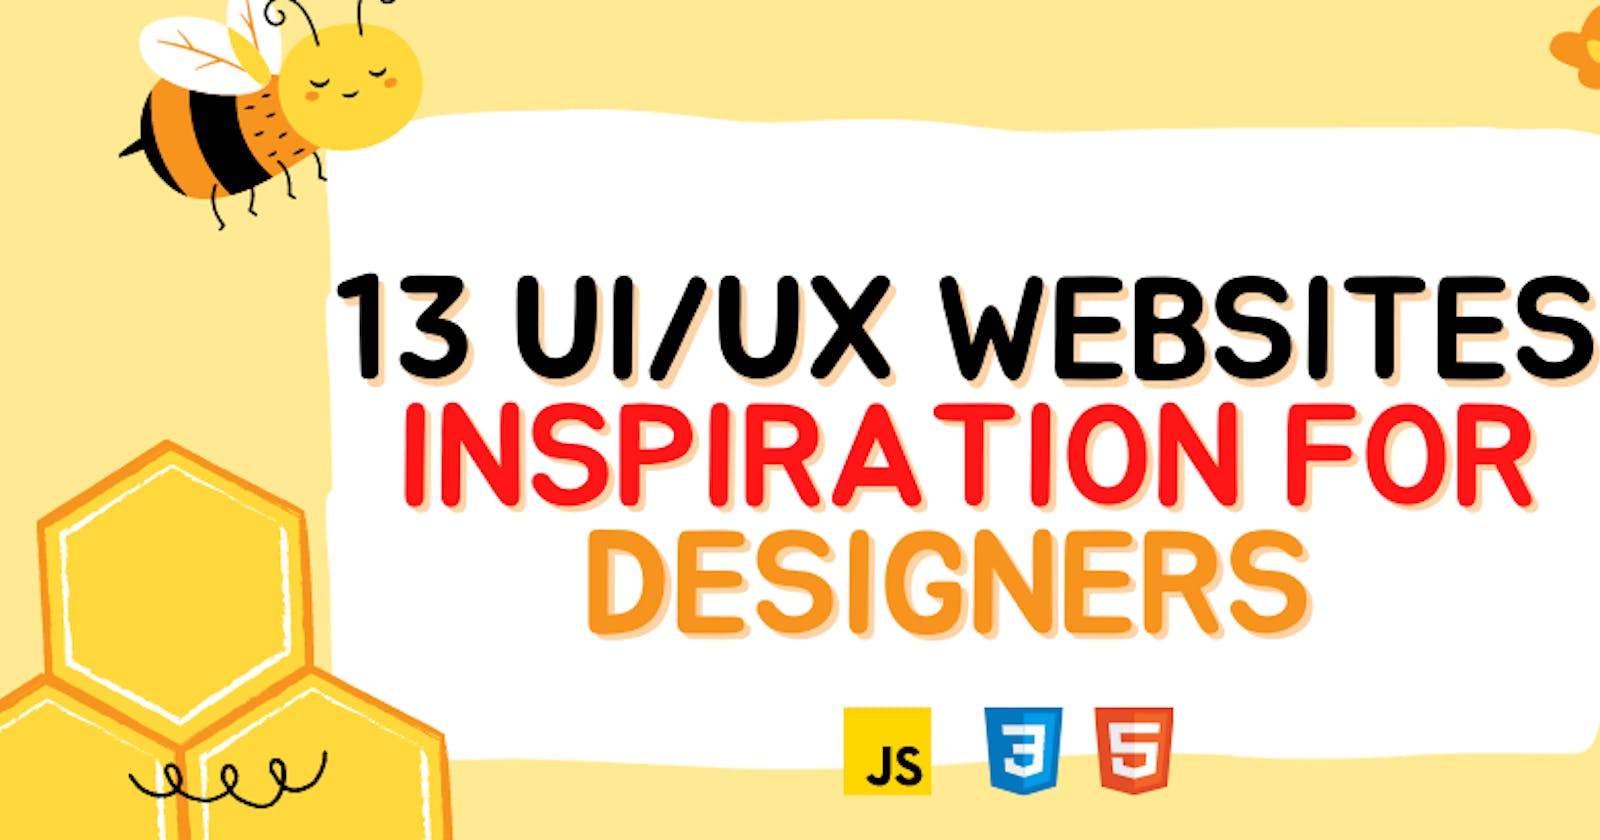 13 Ultimate UI/UX website inspiration for Designers and Developers